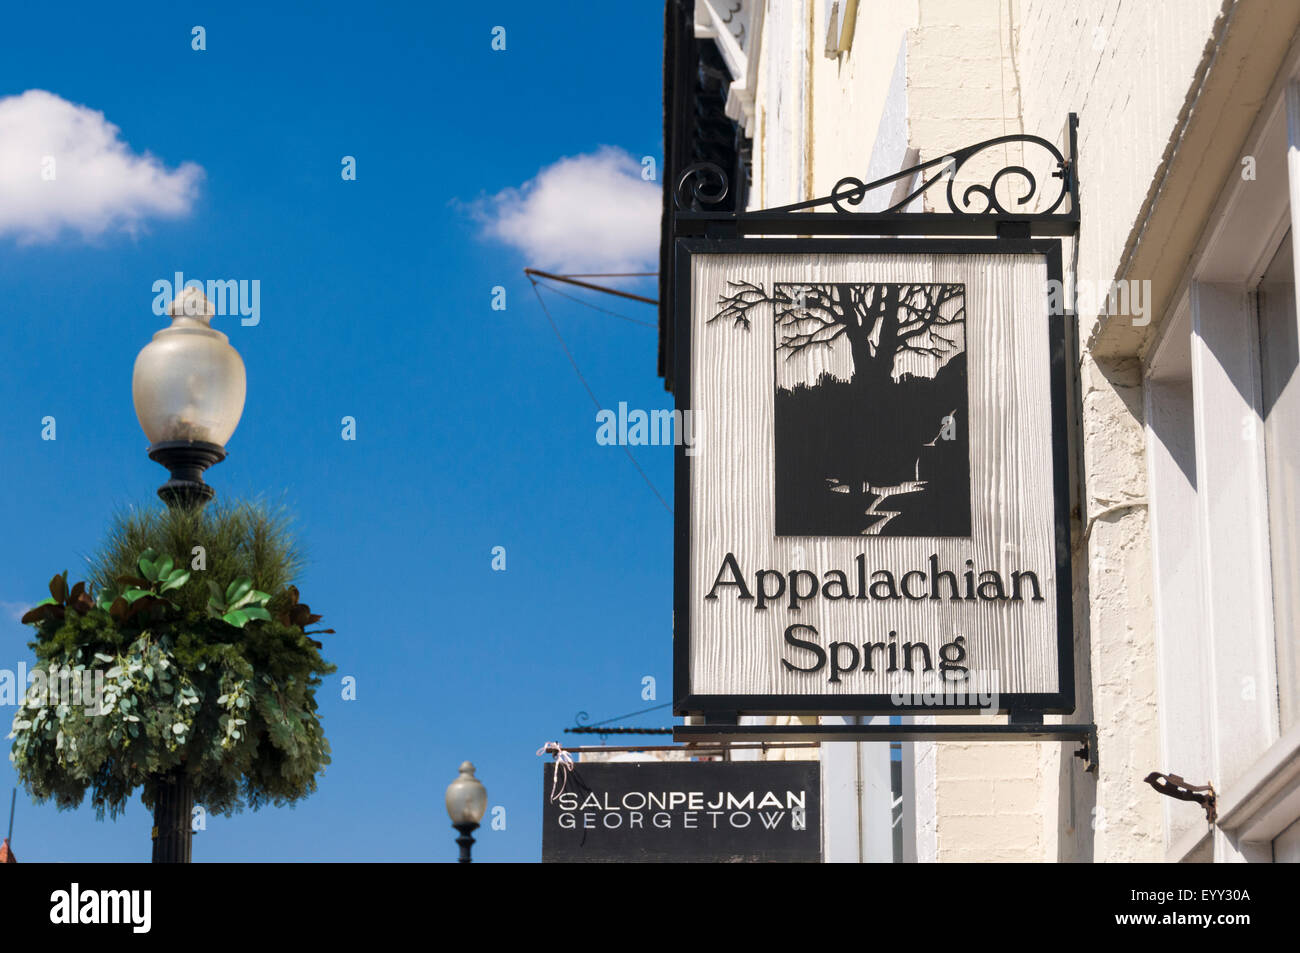 Sign for the Appalachian Spring retail company set up by David and Paula Brooks in Georgetown, Washington, D.C., Stock Photo